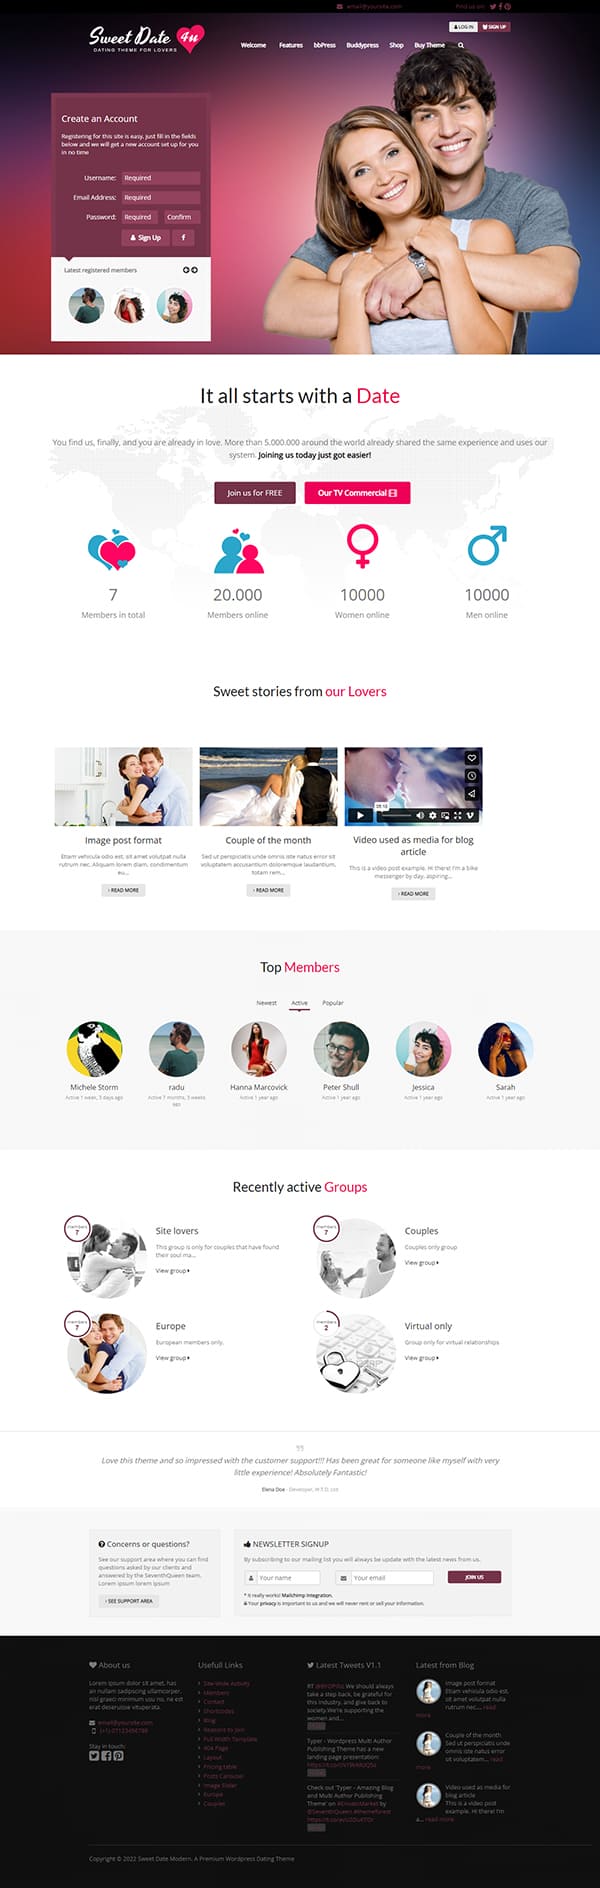 Sweet Date – More than a WordPress Dating Theme